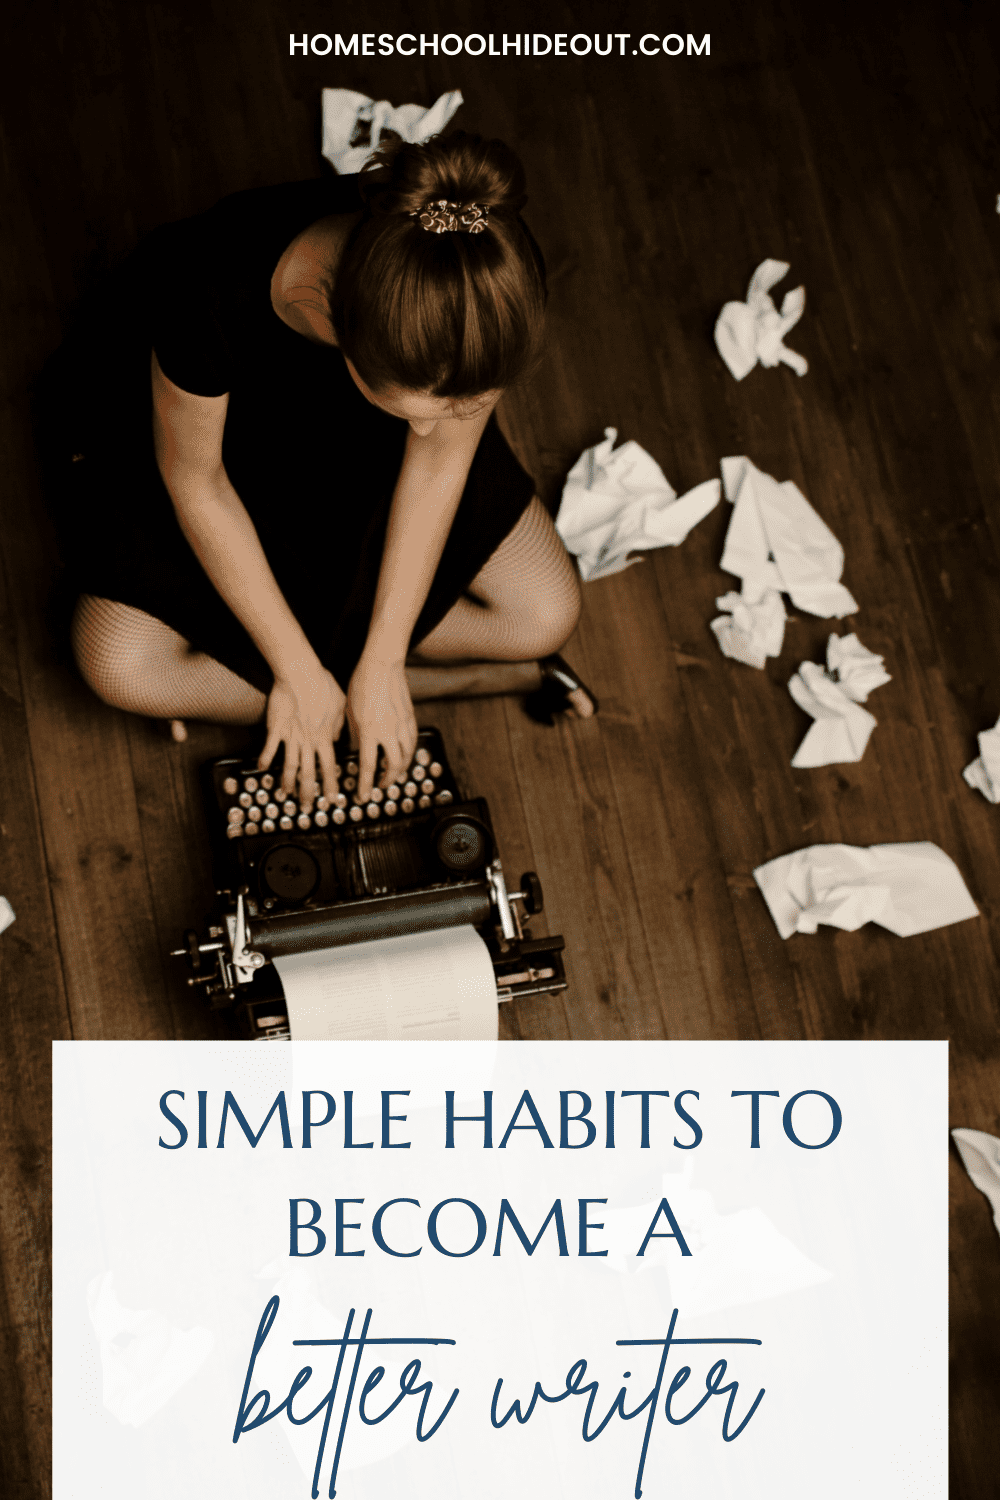 Just a few writing habits can make you a better writer. I wouldn't have ever thought of #6!